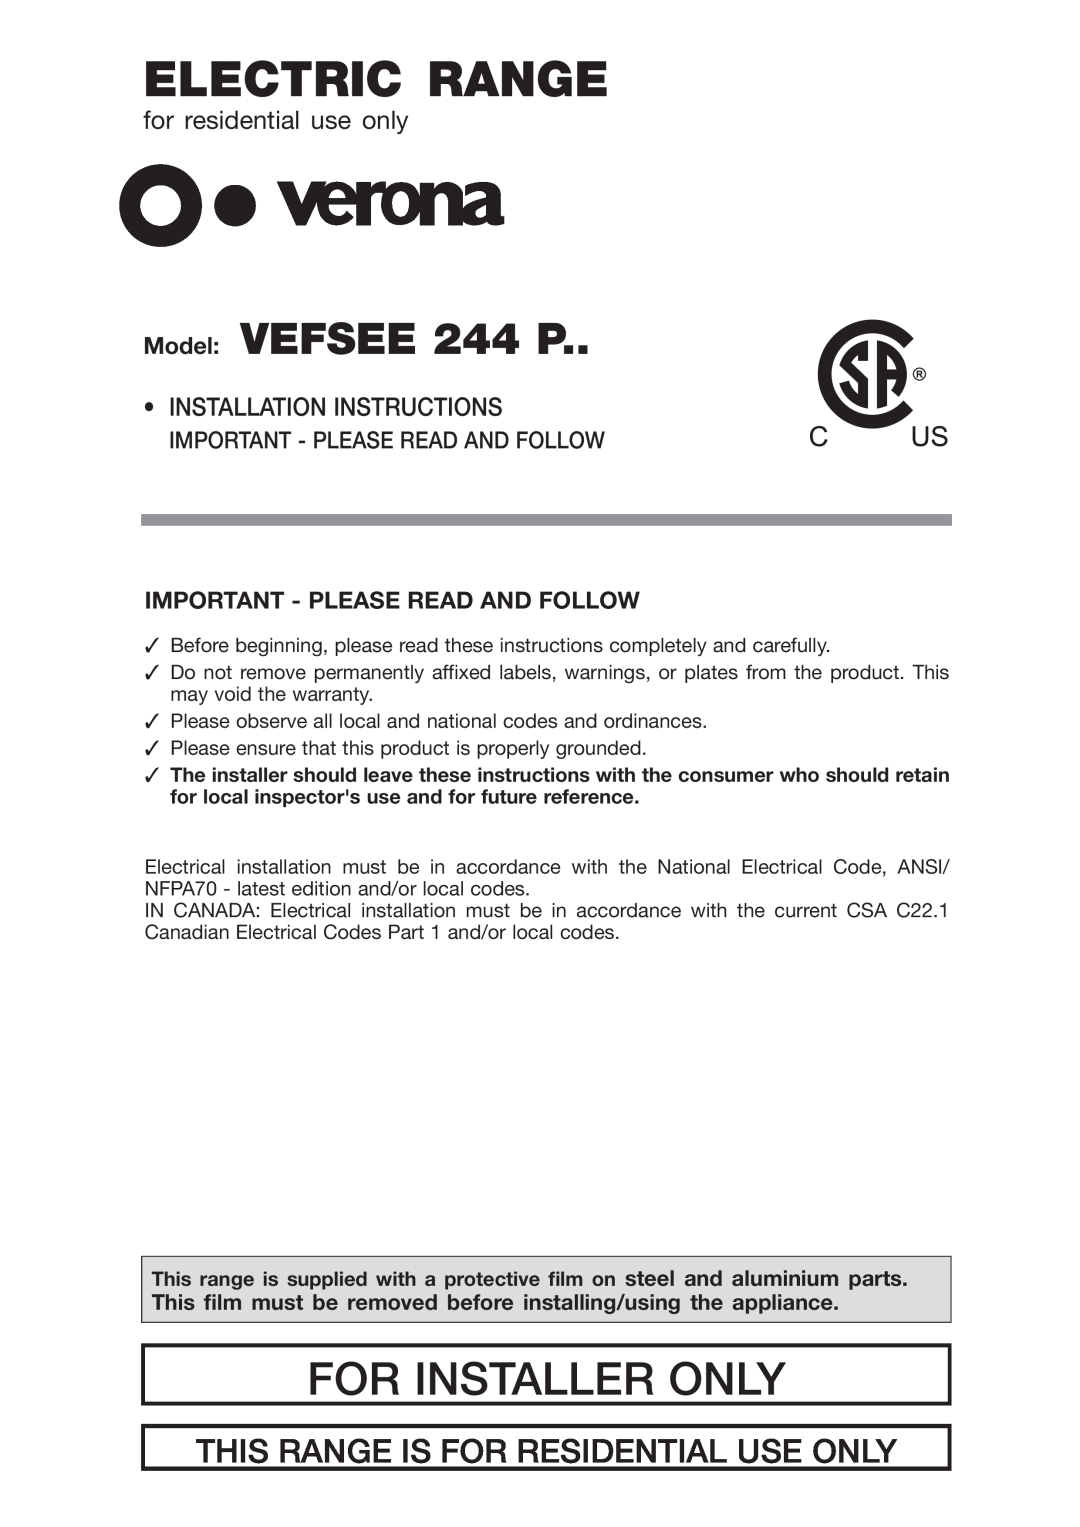 Verona VEFSEE 244 P warranty for residential use only, Installation Instructions, Electric Range, For Installer Only 